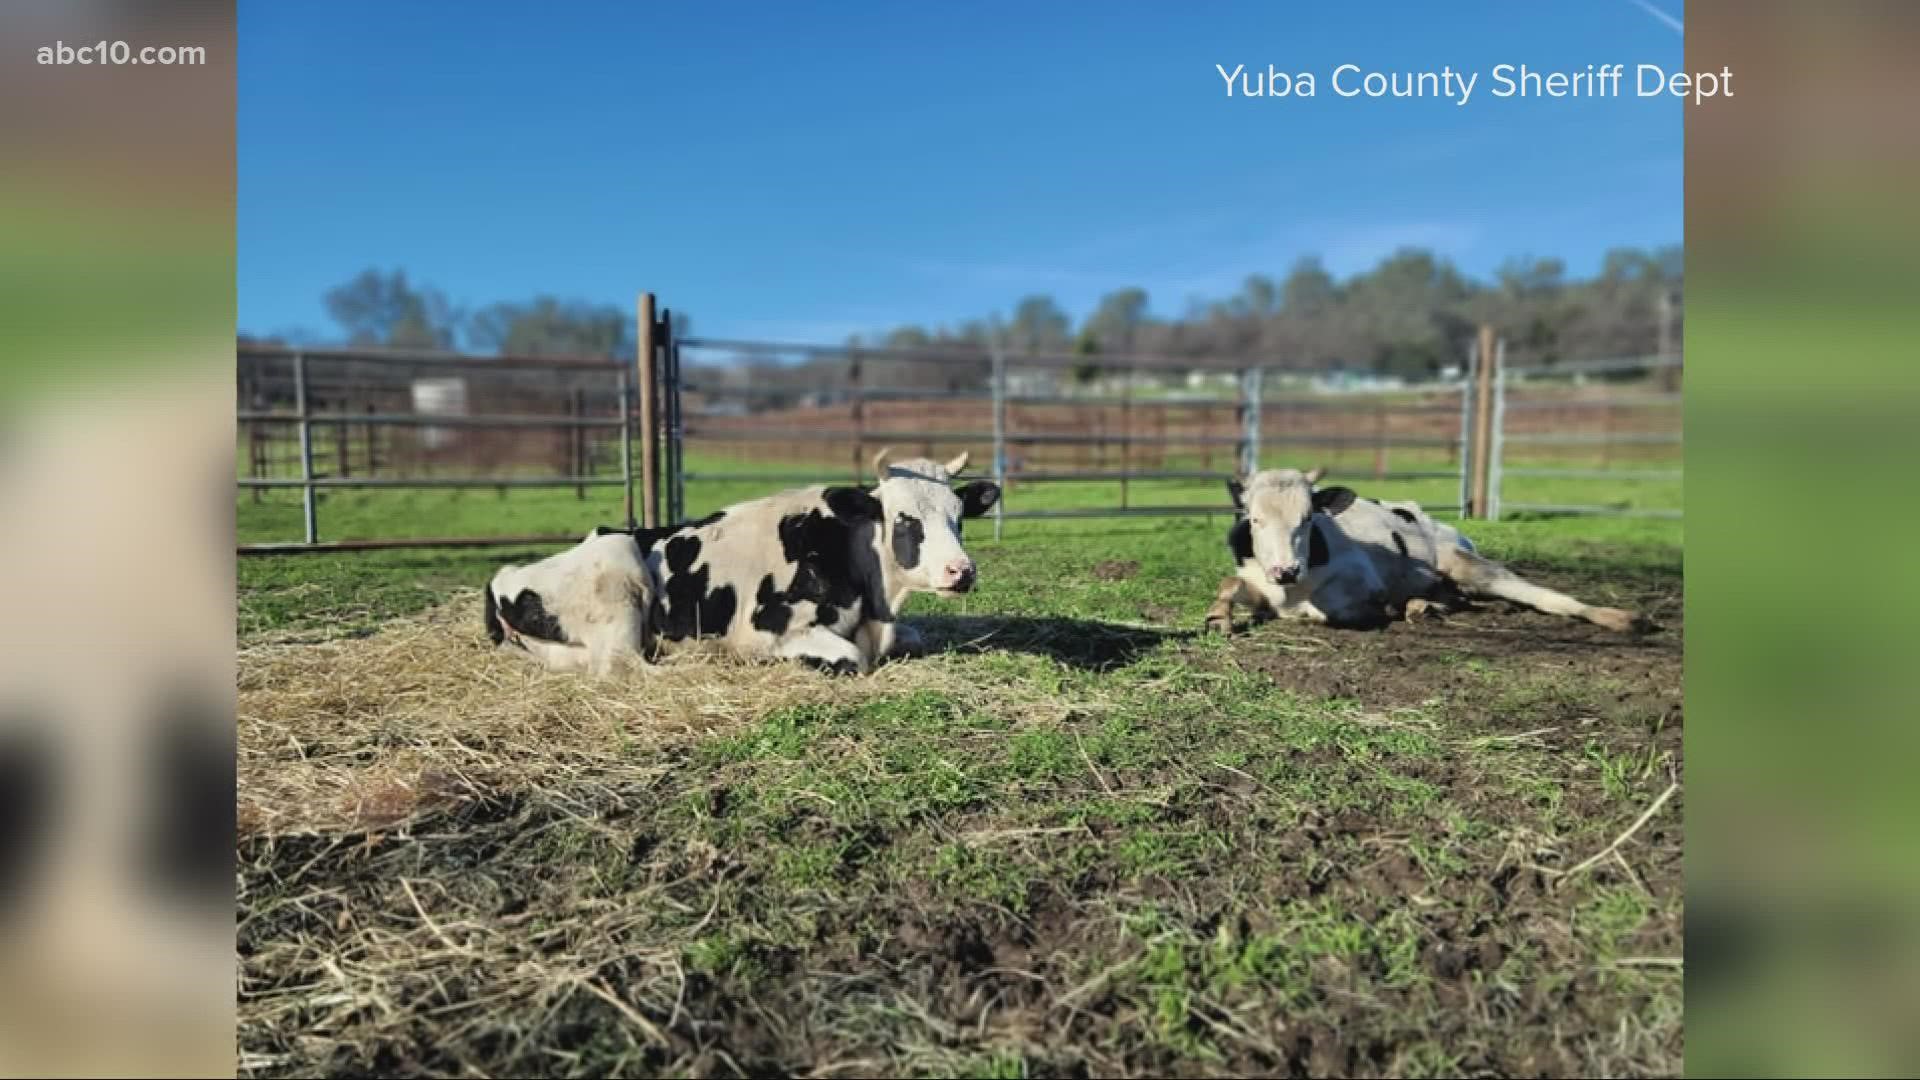 Yuba County Animal Care Services, along with the deputies, seized the 61 animals living inside the uninhabitable residence.